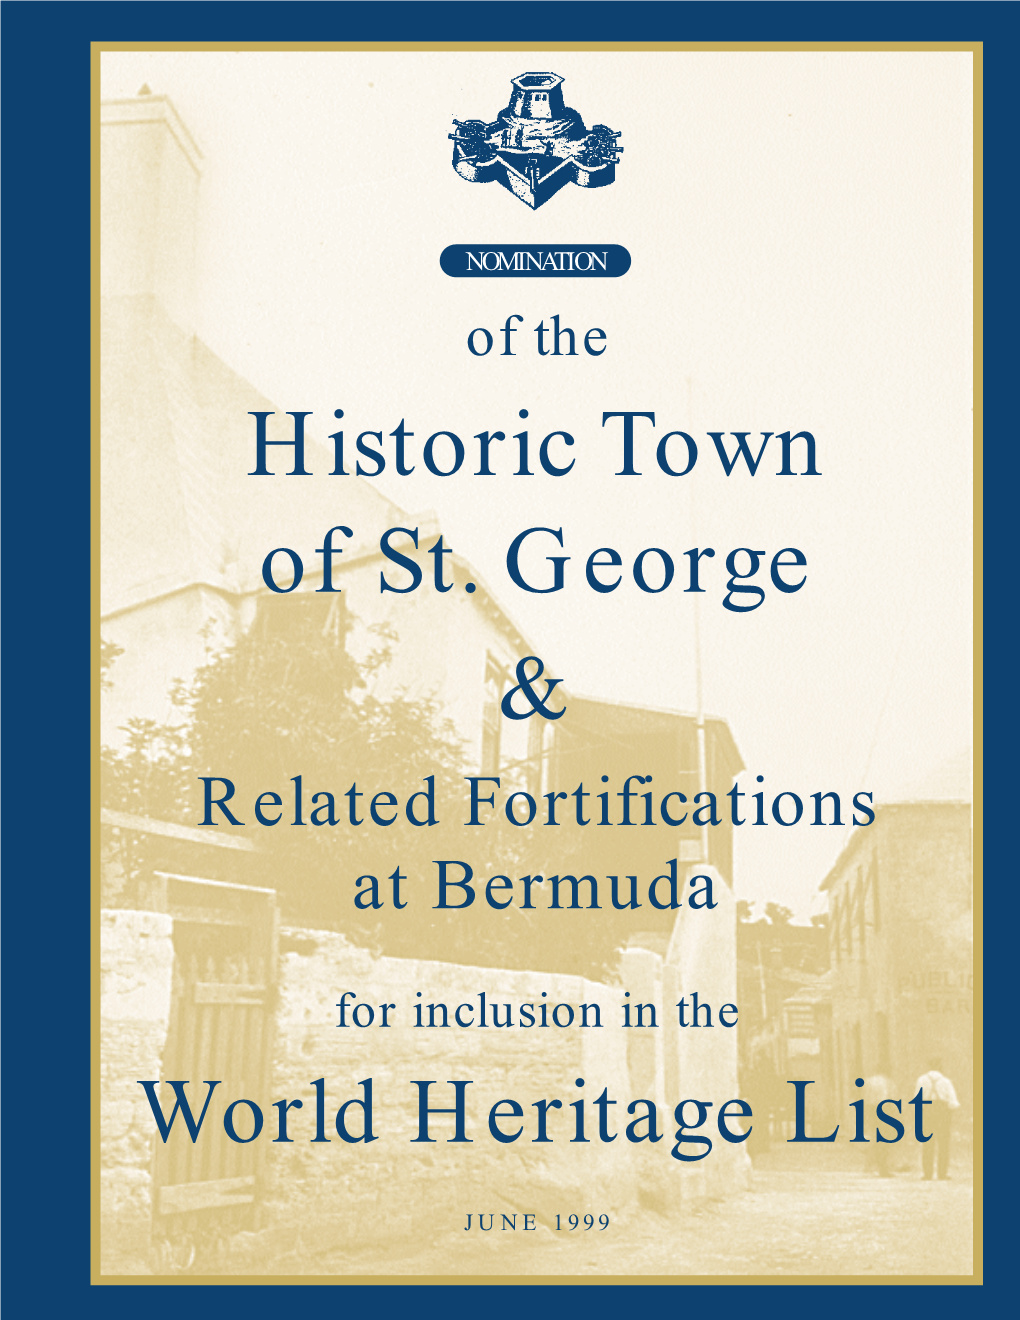 Historic Town of St. George & Related Fortifications at Bermuda